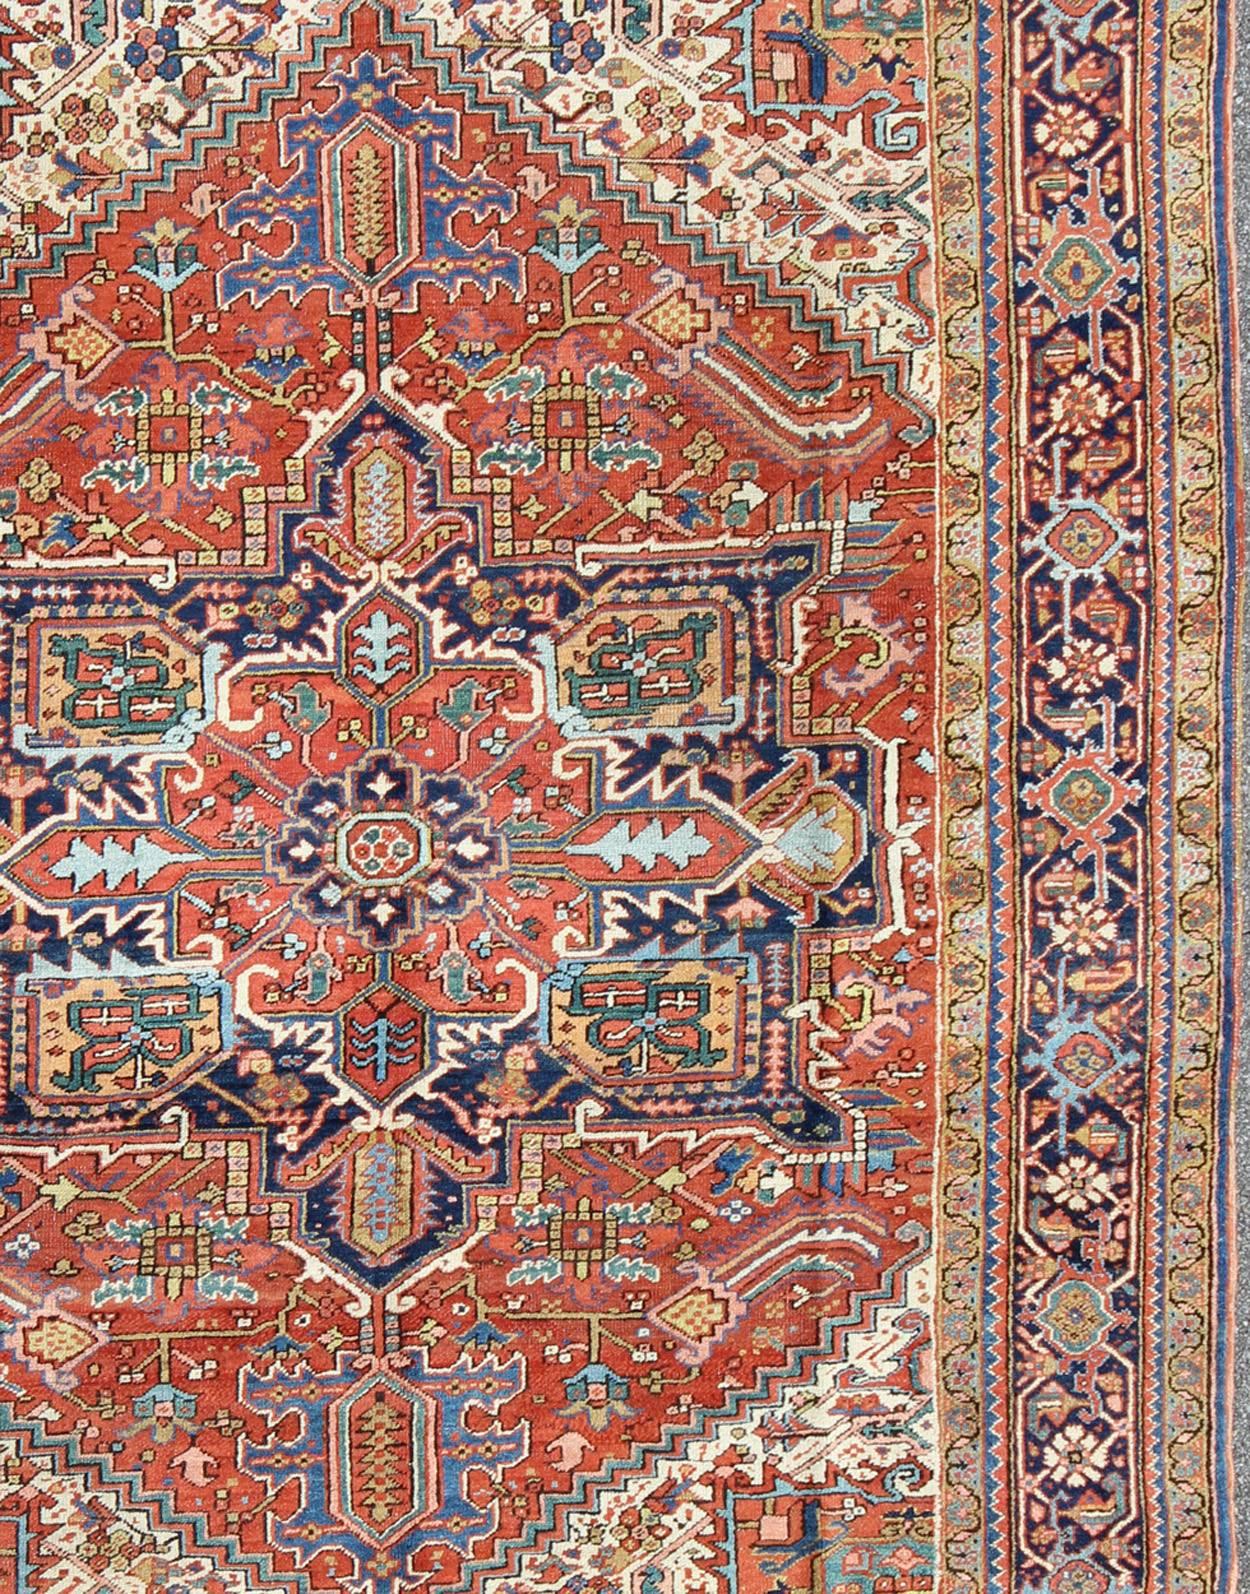 Hand-Knotted Antique Colorful Persian Heriz Rug with Geometric Patterns and Intricate Design For Sale